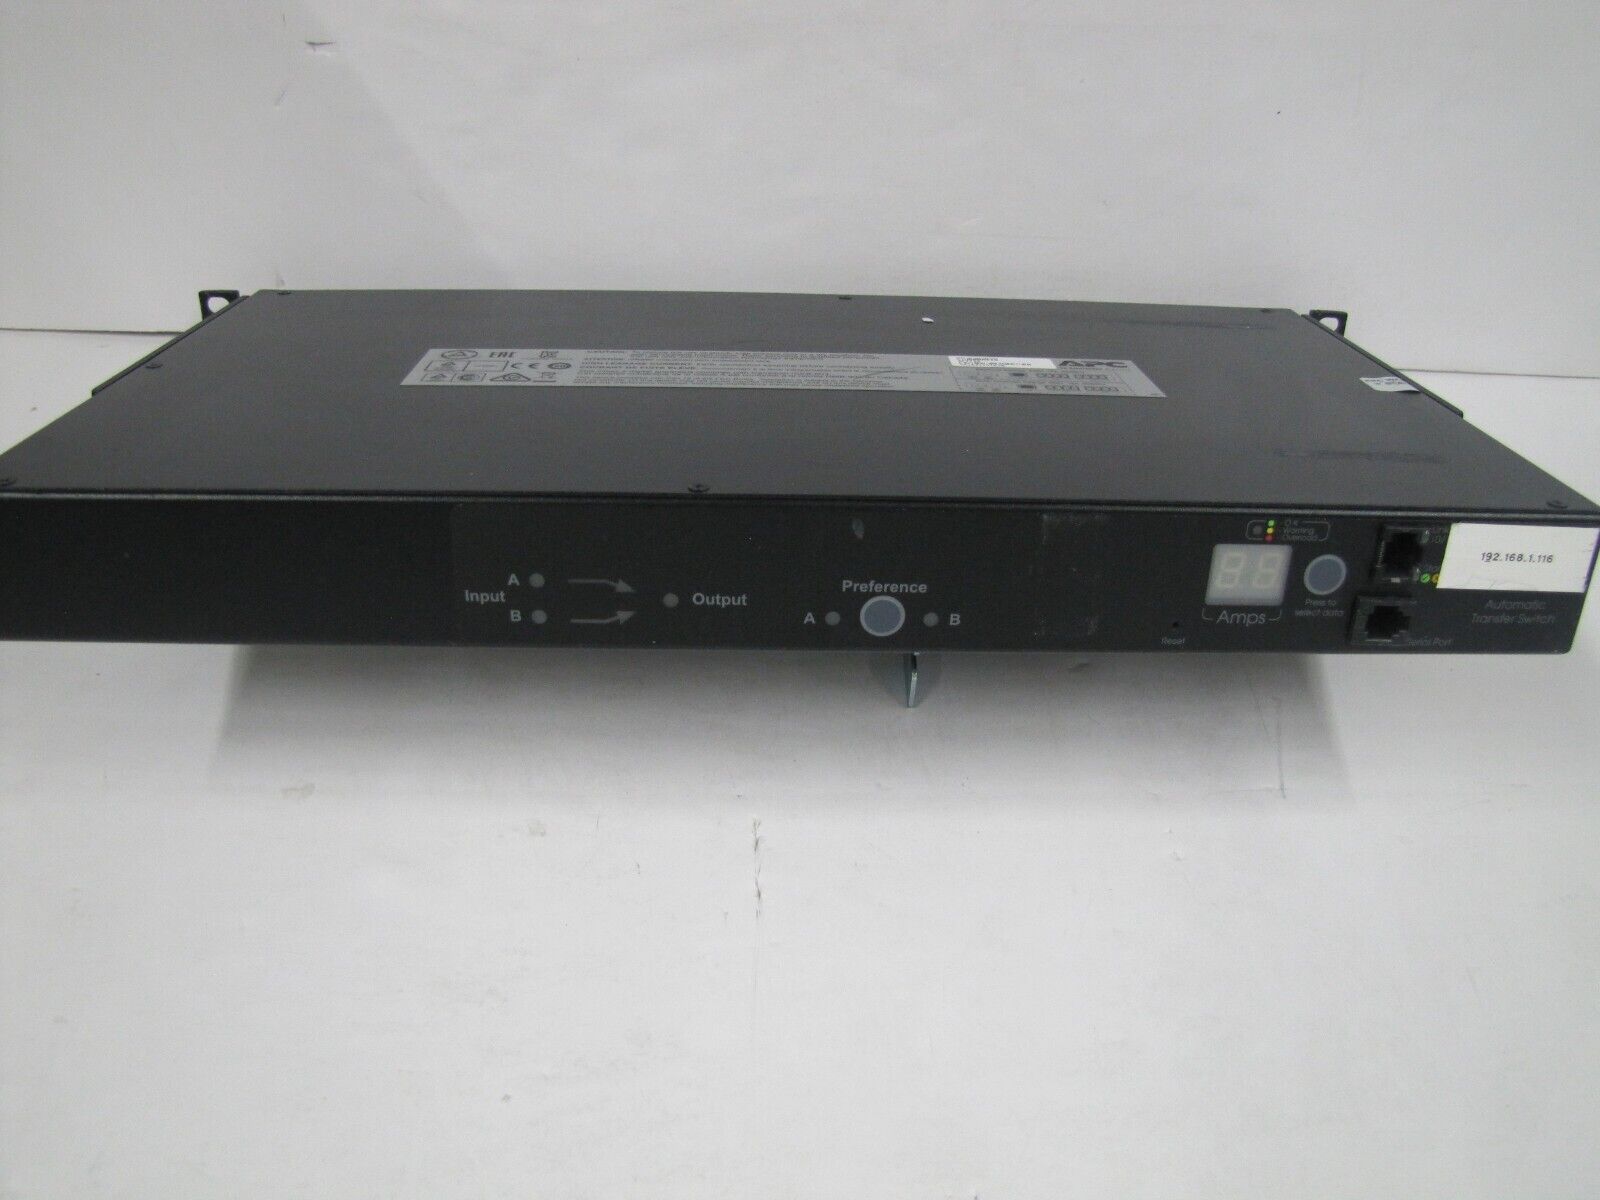 APC AP7723 Automatic Transfer Switch includes Rack Mount Ears, Tested - Working